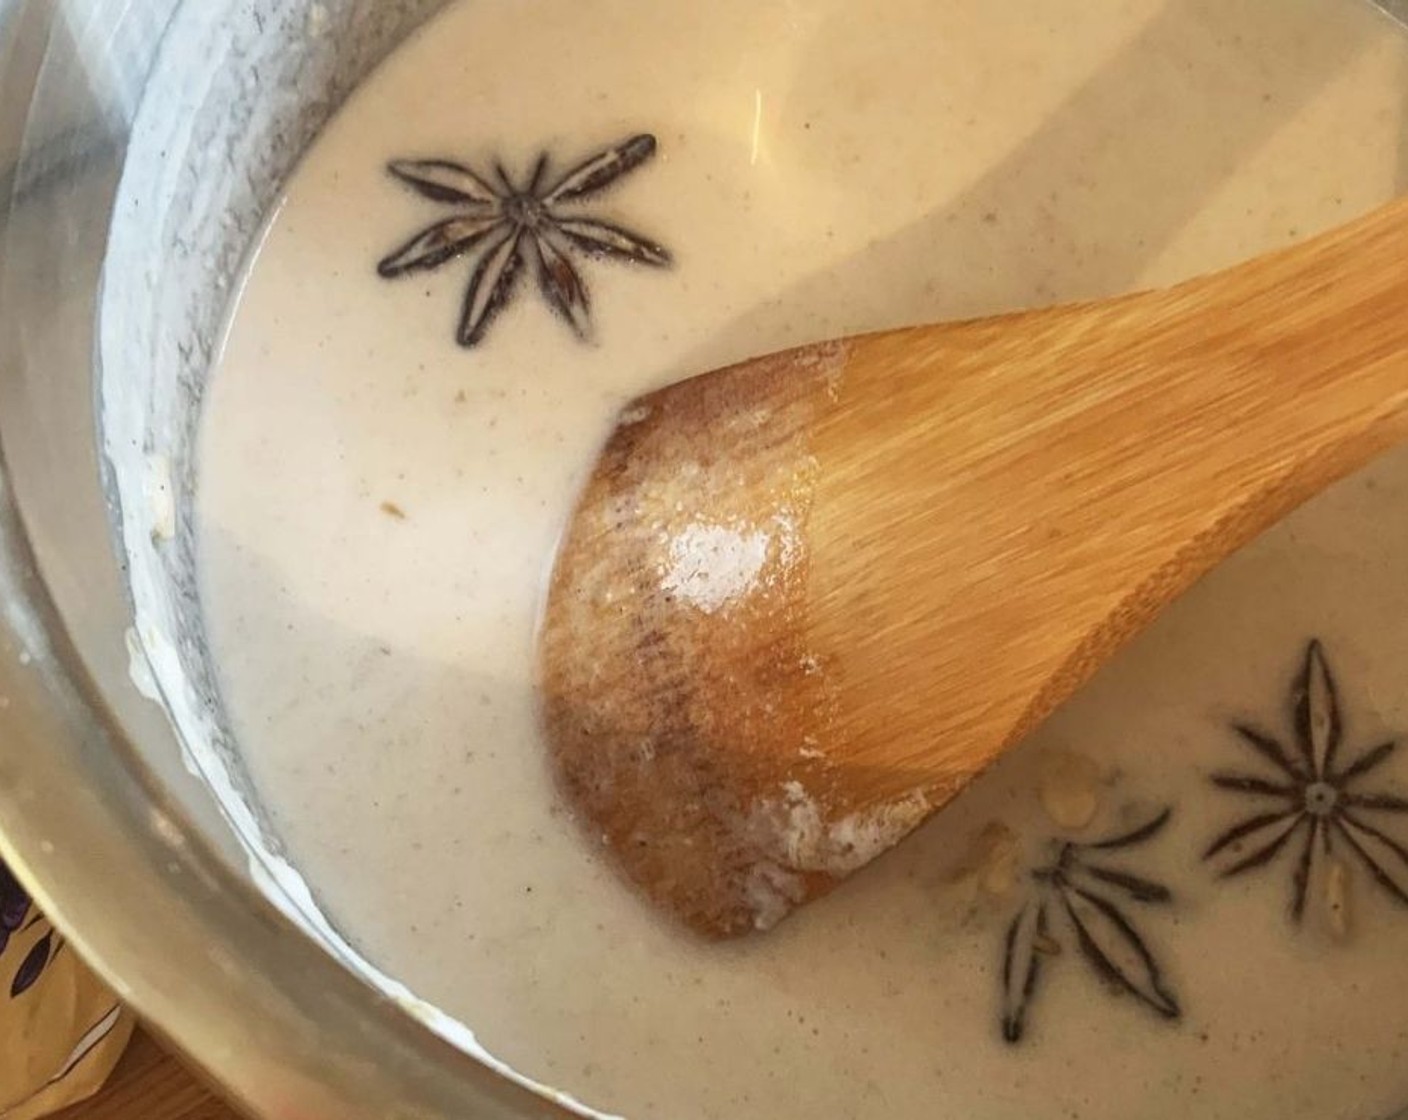 step 4 In a saucepan, bring Coconut Milk (7 oz), Soy Milk (3.5 oz), Water (3.5 oz), Star Anise (1), Vanilla Extract (1/2 tsp), and Ground Cinnamon (1/2 tsp) to a boil